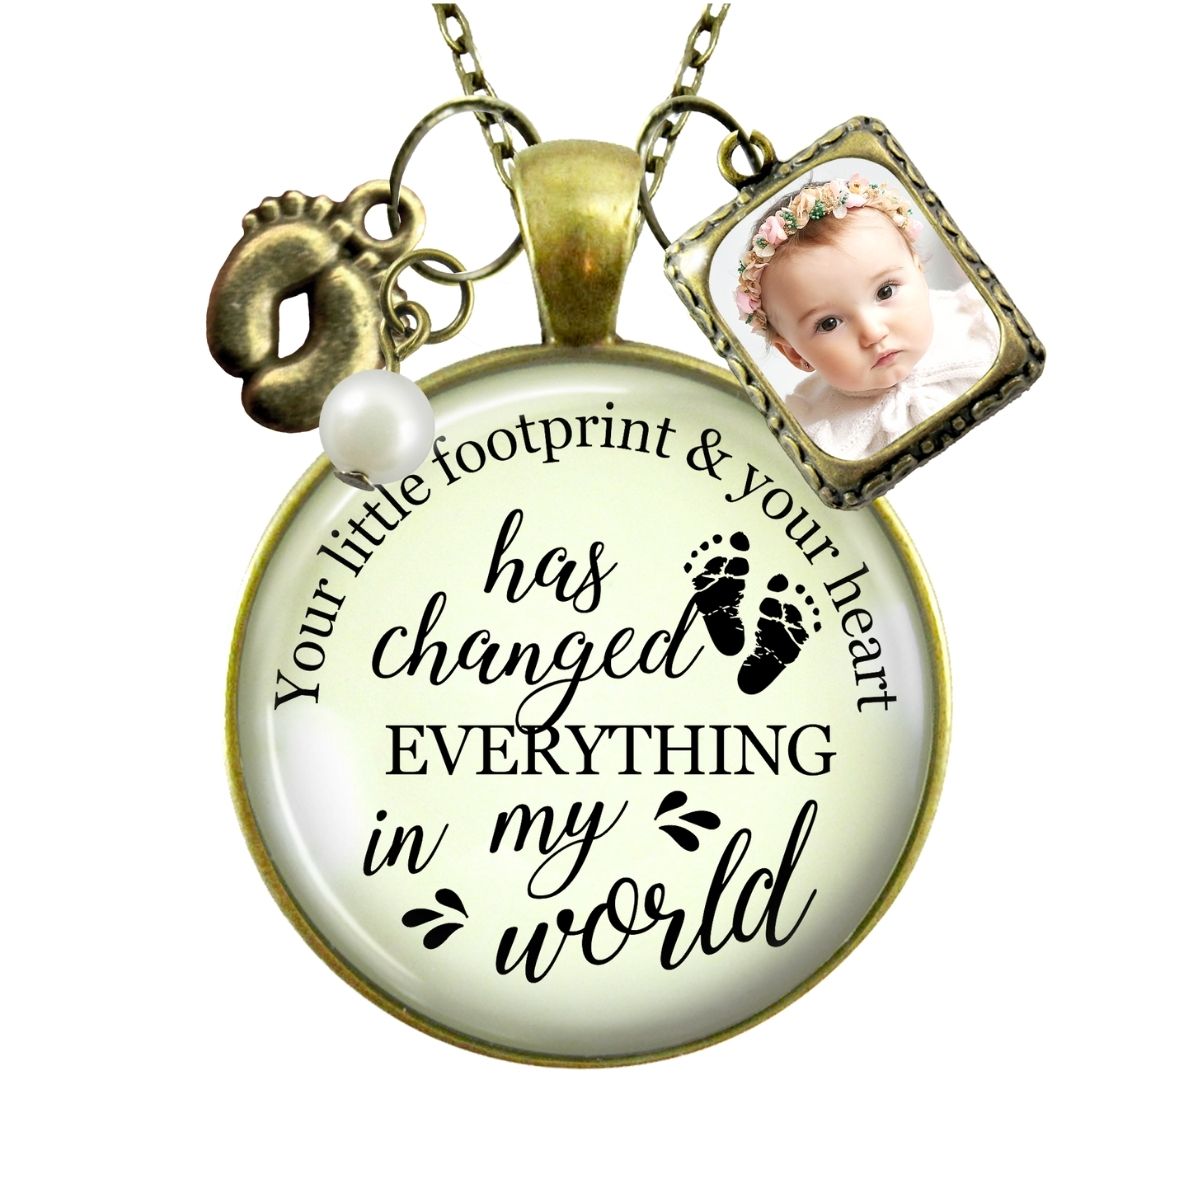 Handmade Gutsy Goodness Jewelry New Mom Necklace Your Little Footprint Gift Baby Feet & Photo Frame Charm, DIY Picture Template